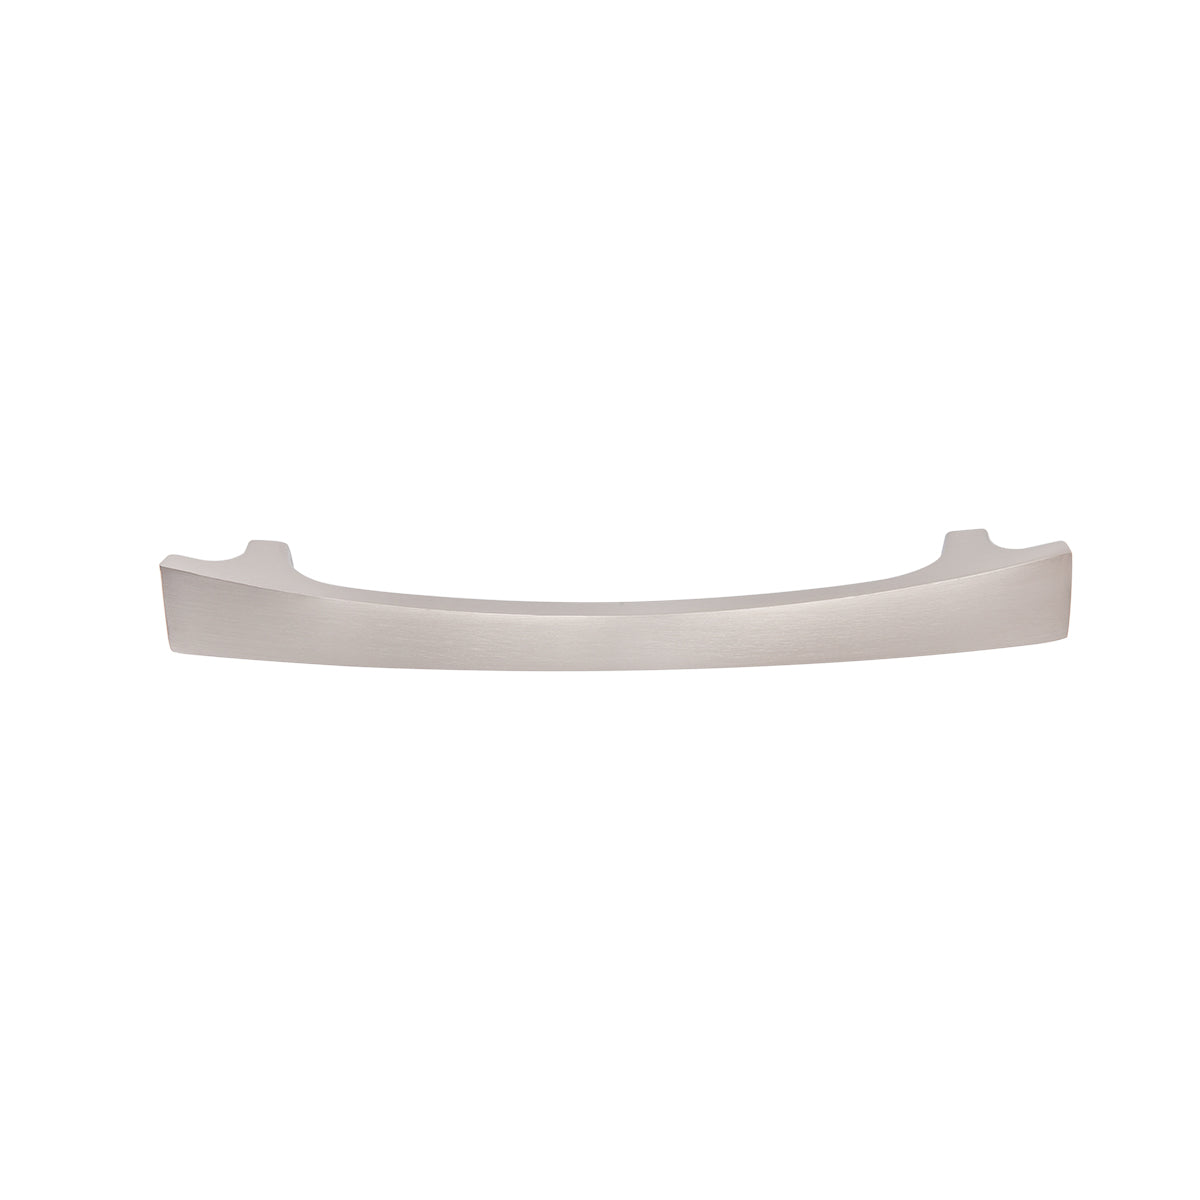 South Main Hardware Modern Curved Bar Cabinet Pull, 6.38